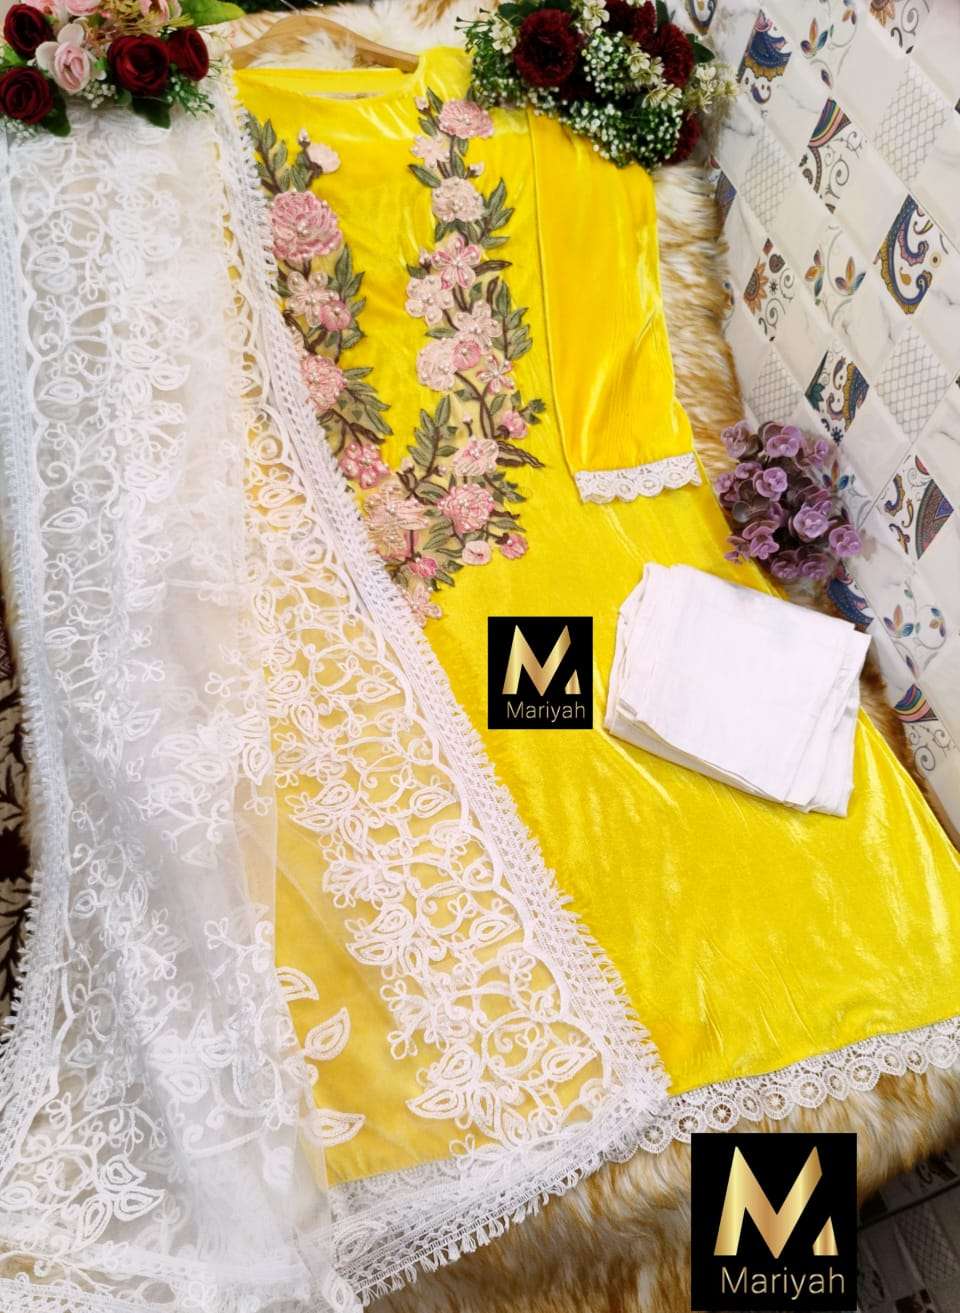 MARIYAH HIT DESIGN M-123 BY MARIYAH PAKISTANI SUITS BEAUTIFUL FANCY COLORFUL STYLISH PARTY WEAR & OCCASIONAL WEAR VELVET EMBROIDERY DRESSES AT WHOLESALE PRICE